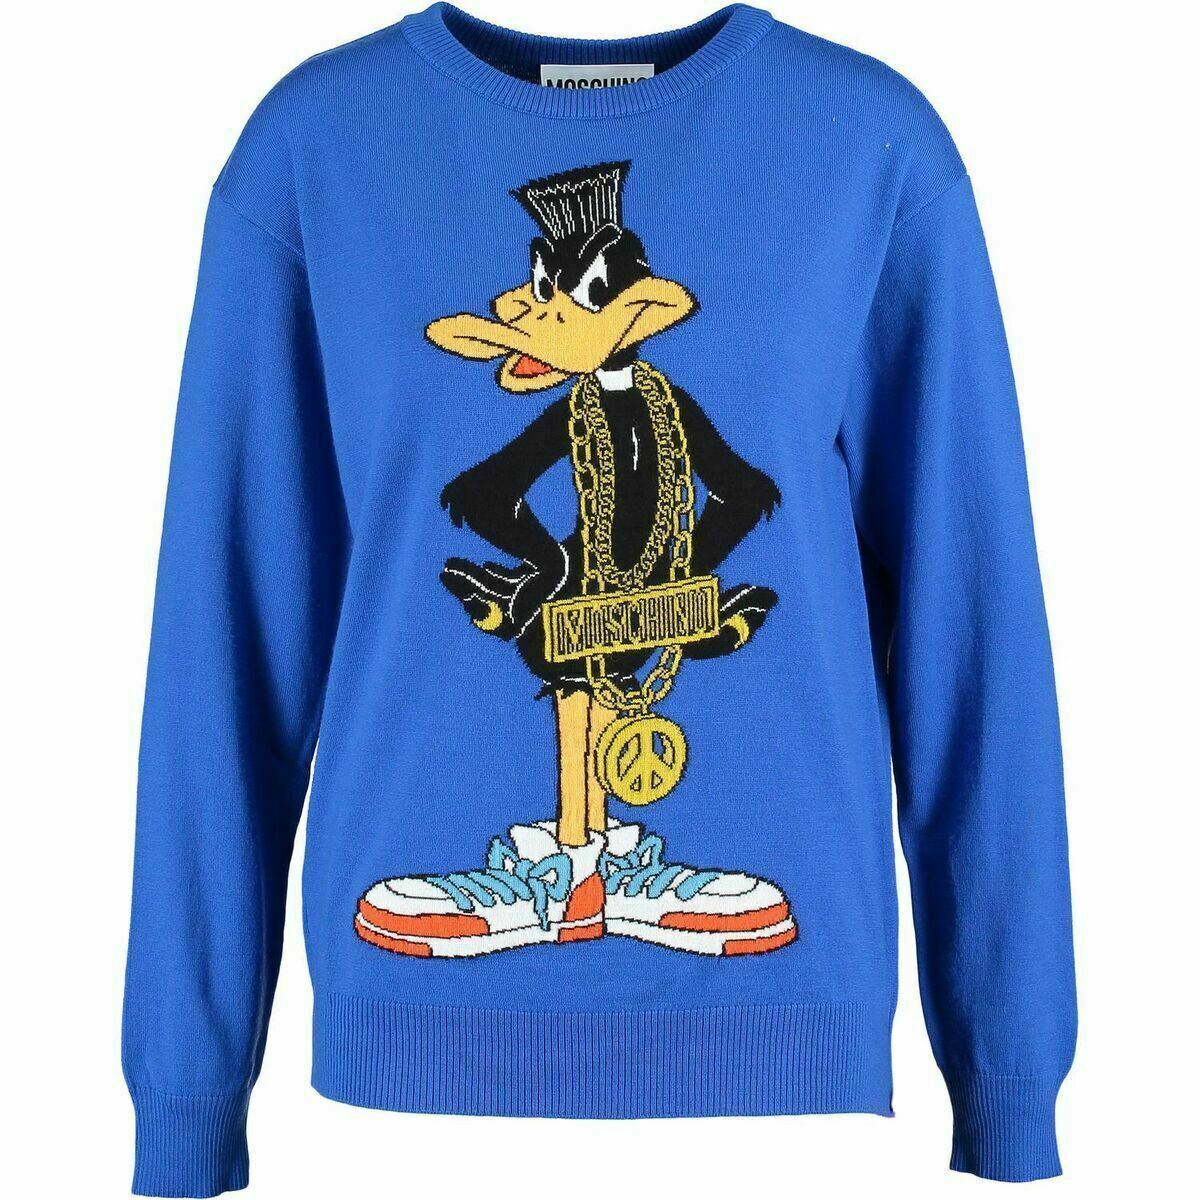 RARE MOSCHINO COUTURE Women's Daffy Duck Jumper by Jeremy Scott /size S /size M